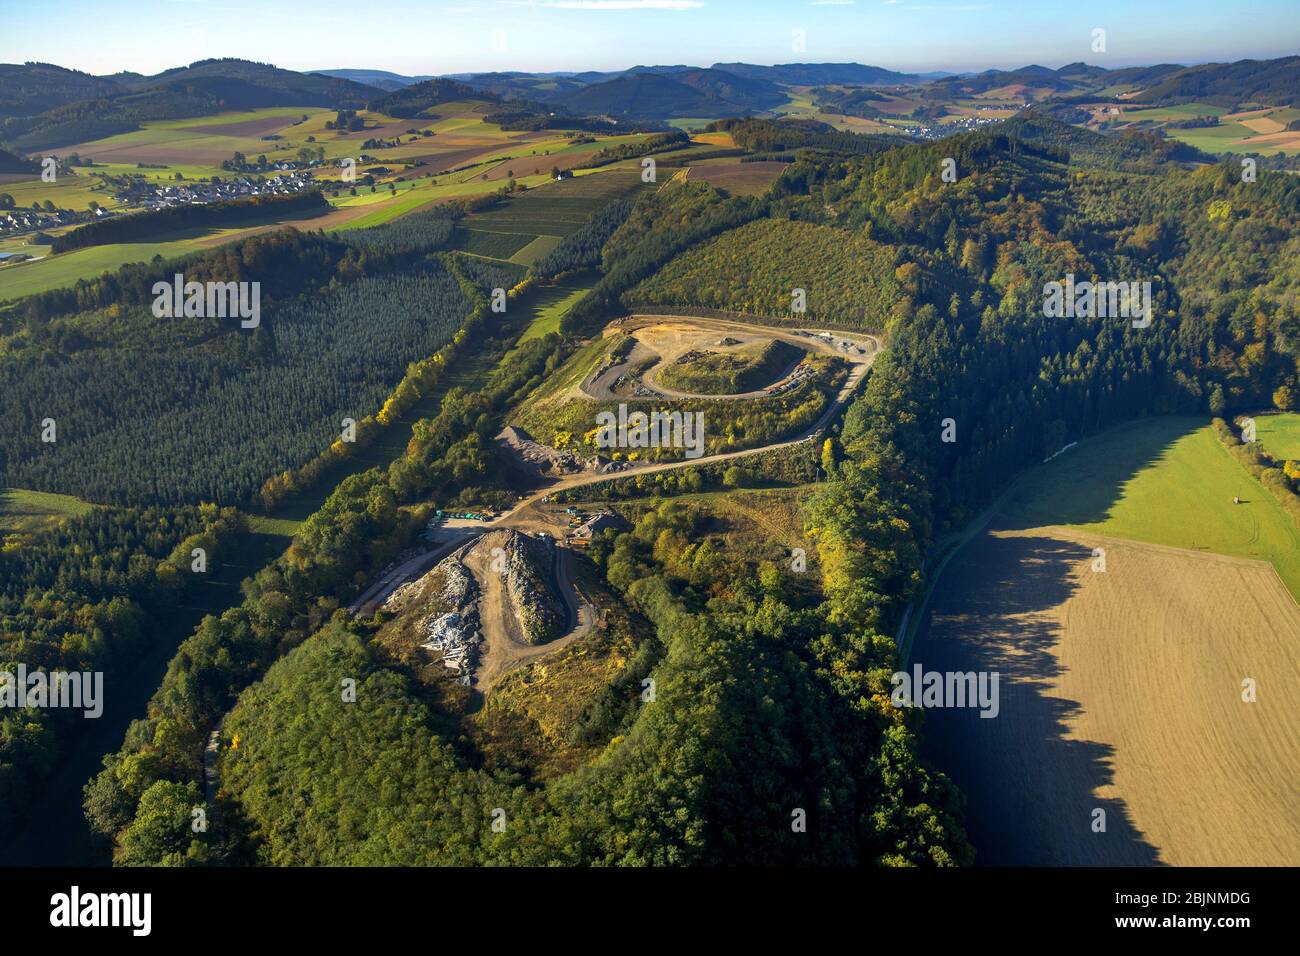 Site of heaped landfill Kehling in Meschede, 16.10.2016, aerial view, Germany, North Rhine-Westphalia, Sauerland, Meschede Stock Photo